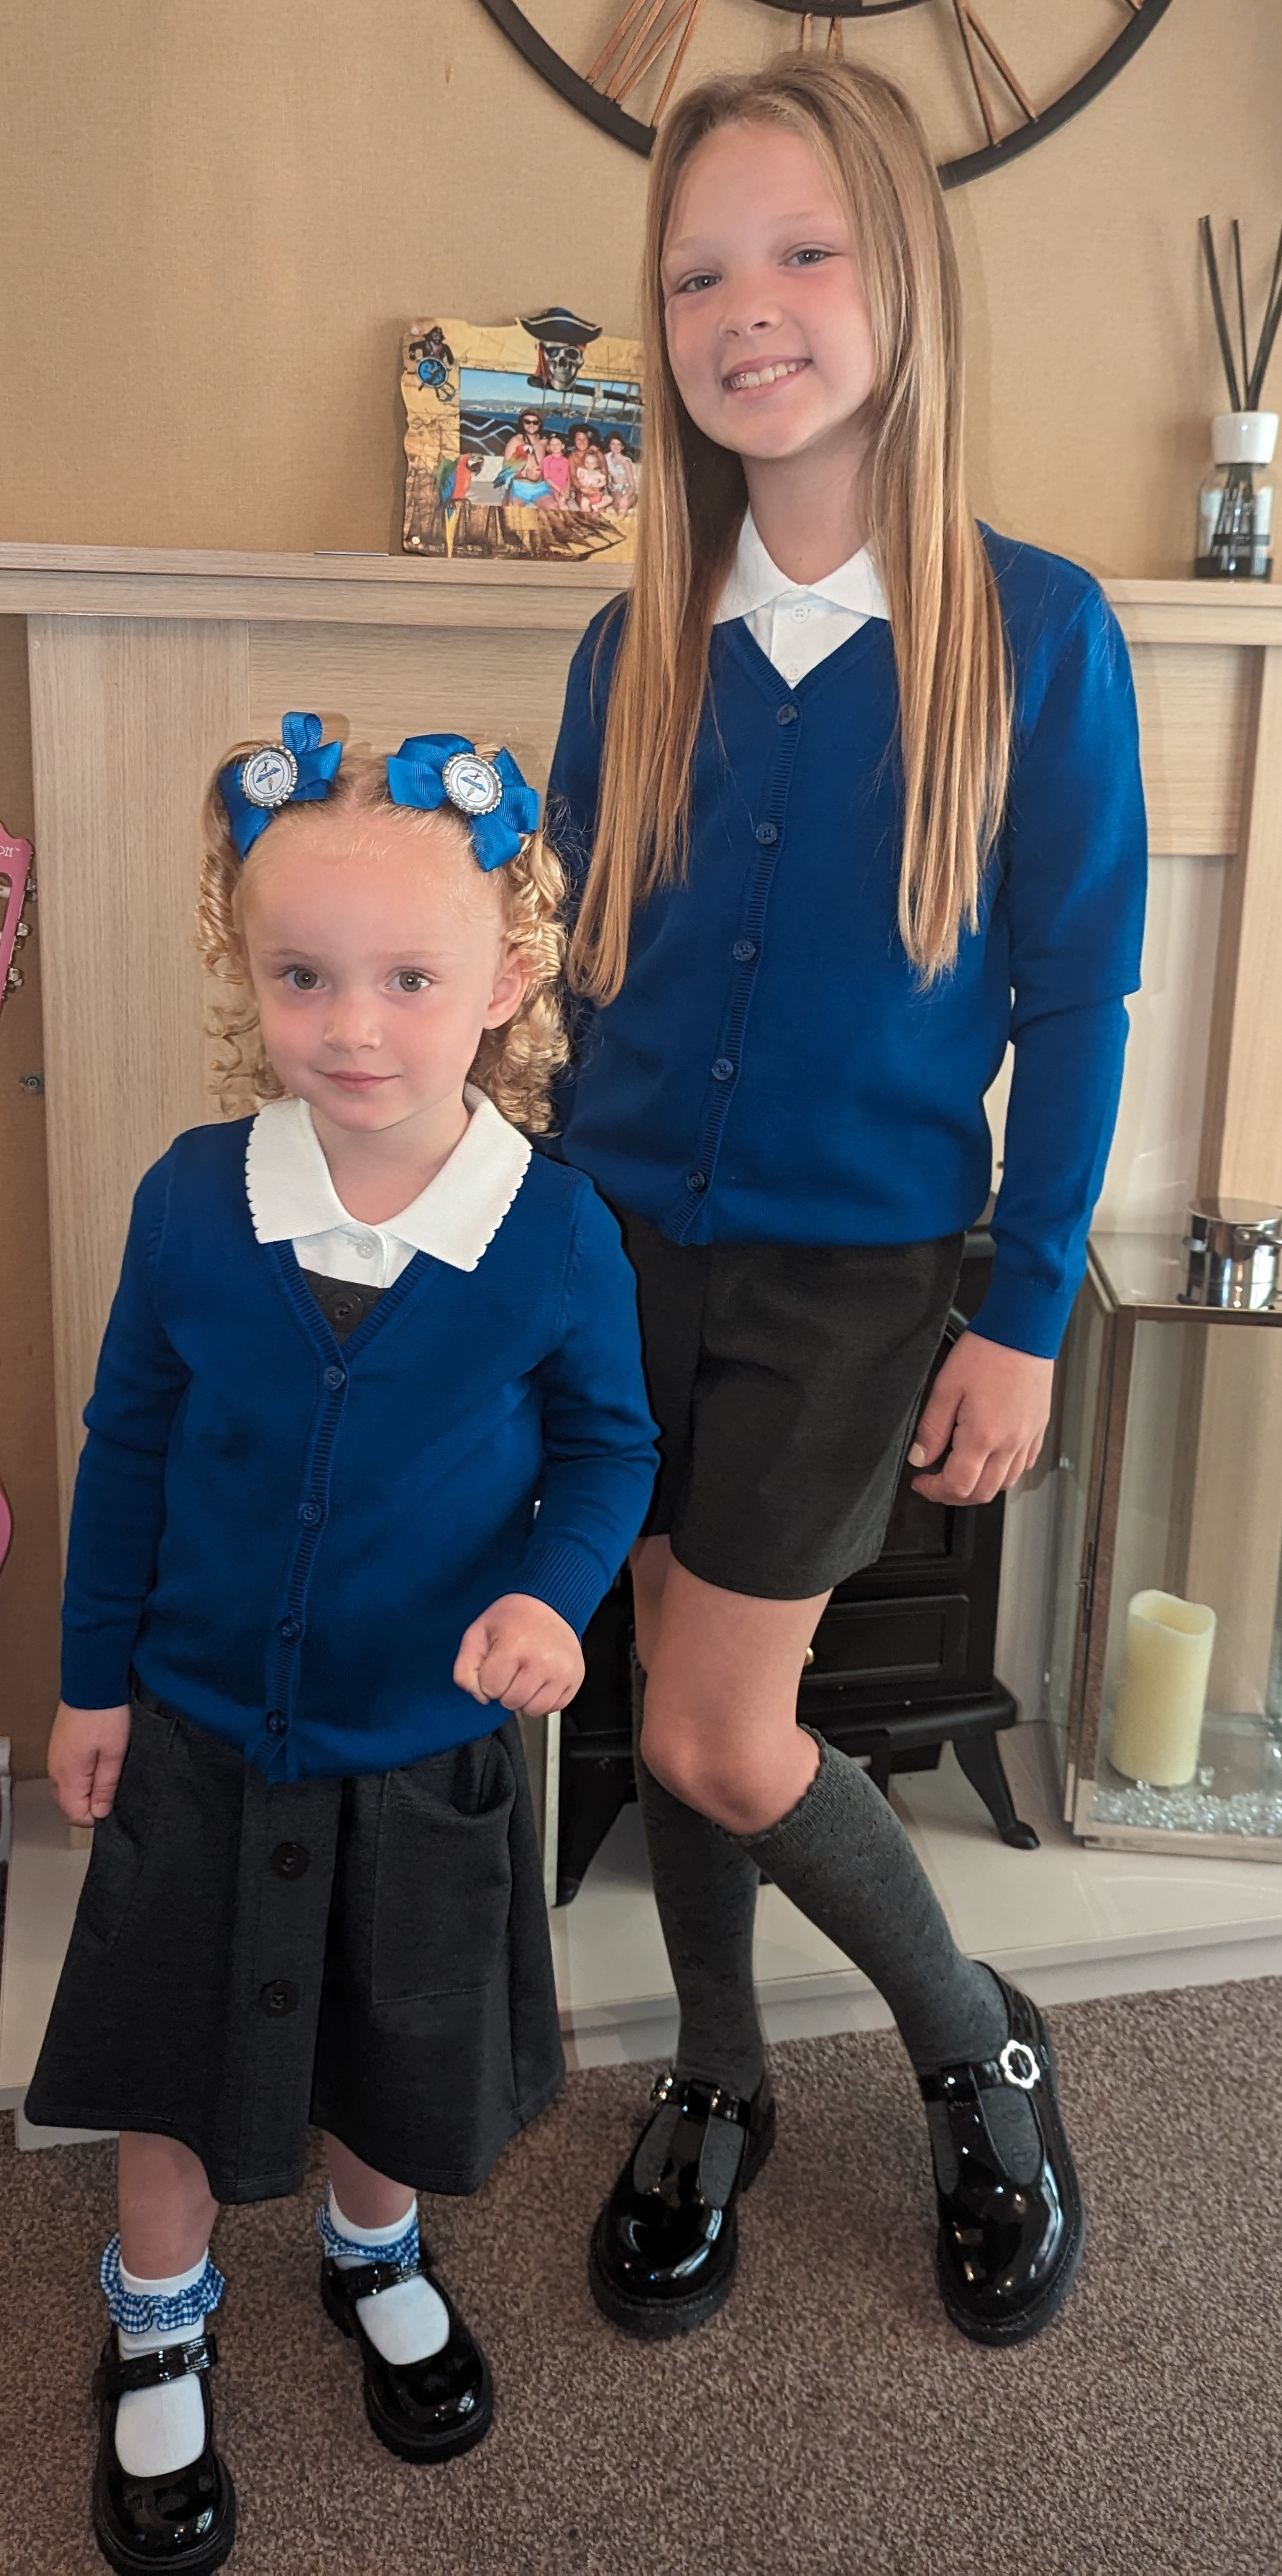 Laura Williams: Garden City in Flintshire: Sisters Maddy, nine and Harper, three. Harpers first day at big girls school, big sister Madison and family accompanied her on her first and very exciting day.